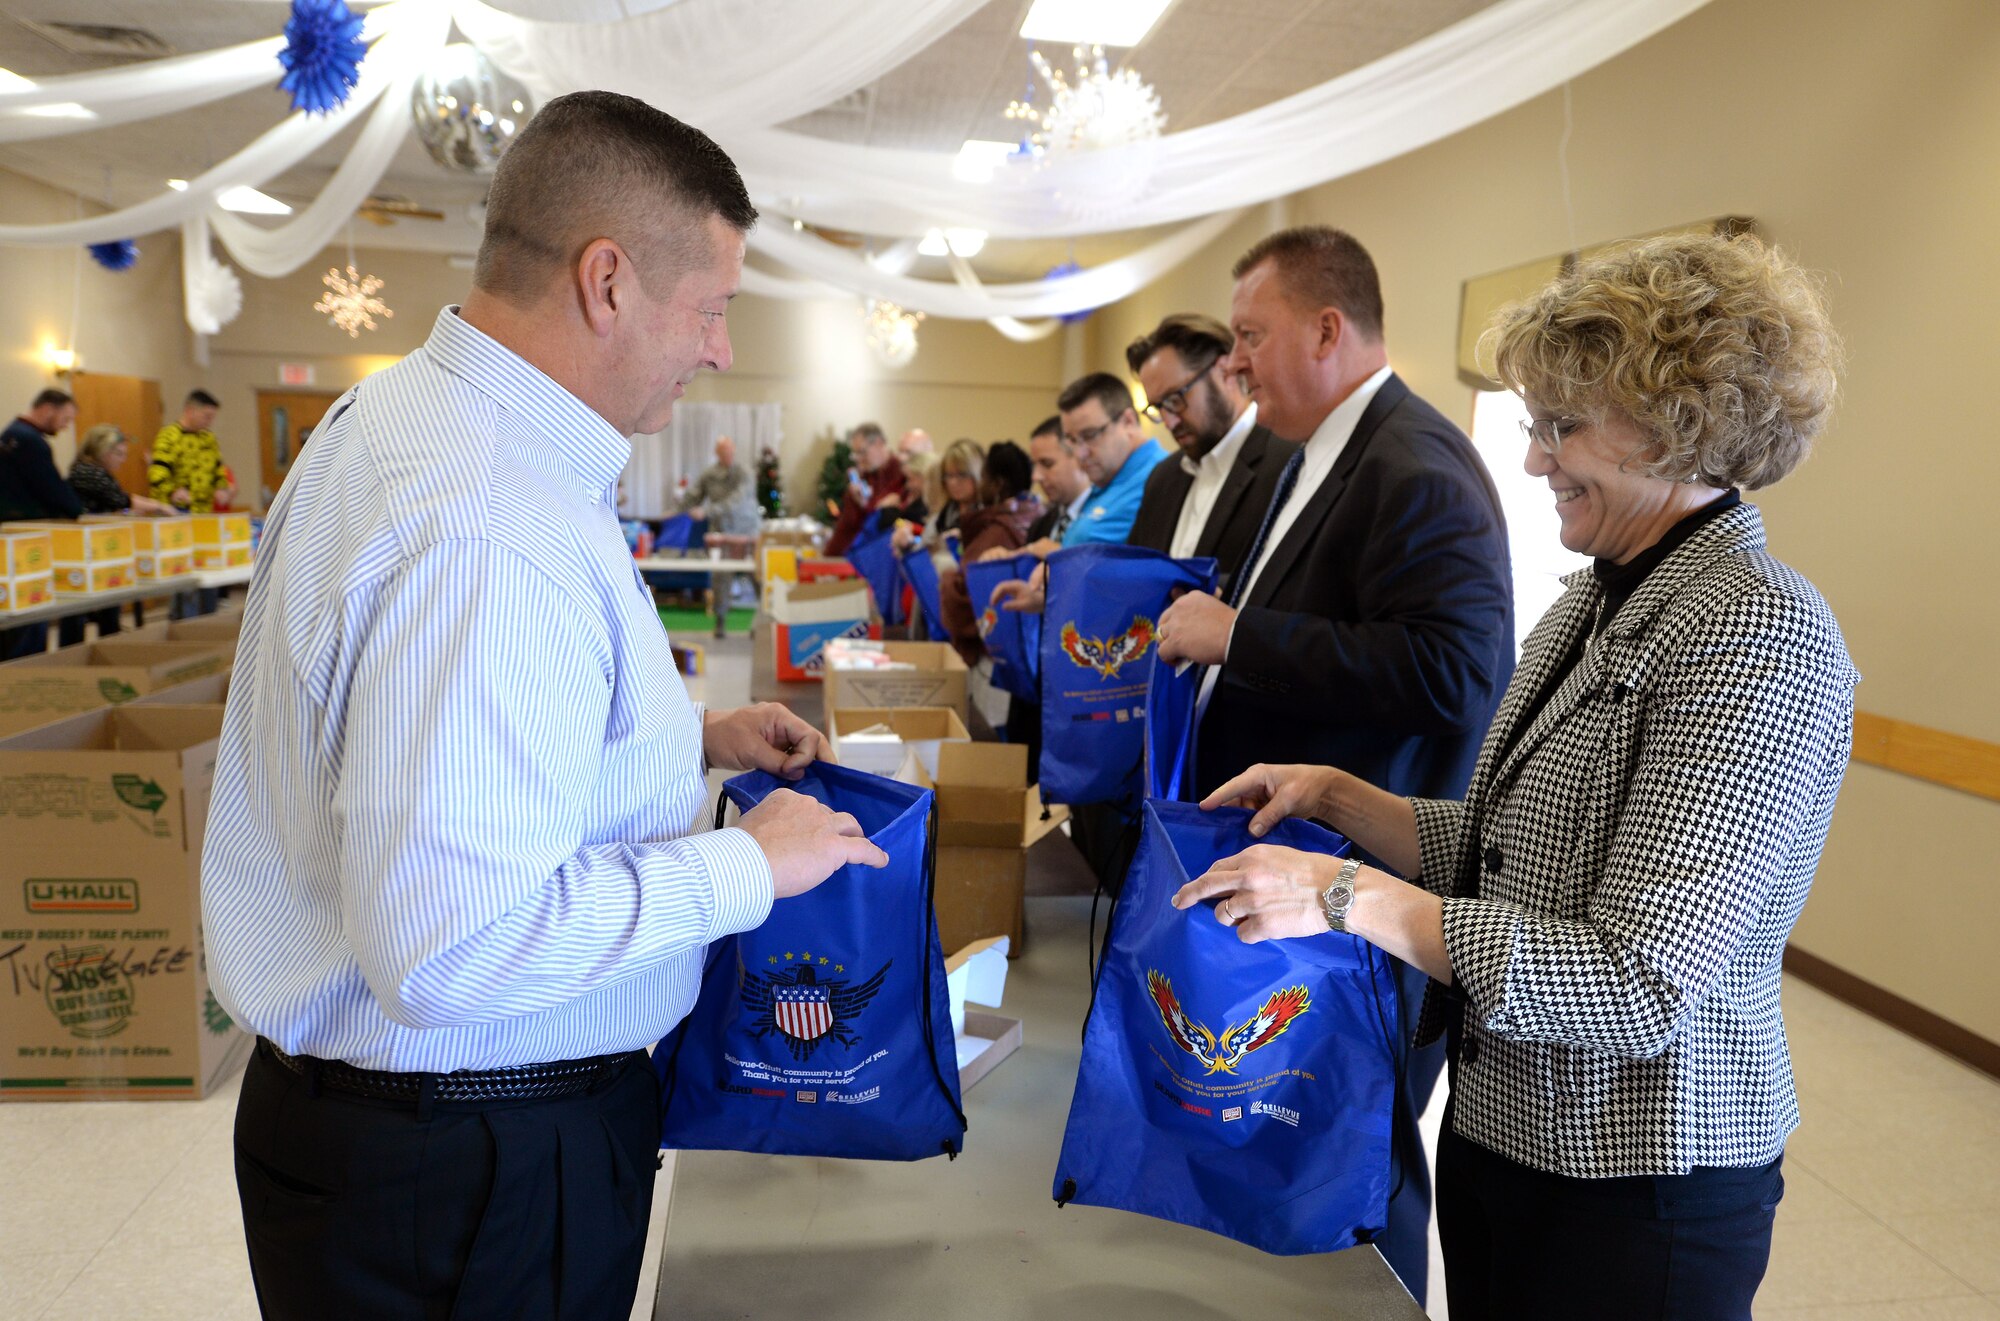 Volunteers with “Operation Holiday Cheer” help assemble bags filled with food, treats, and thank you’s at the Bellevue Volunteer Fire Department hall in Bellevue, Neb. Dec. 5, 2017 as part of “Operation Holiday Cheer."